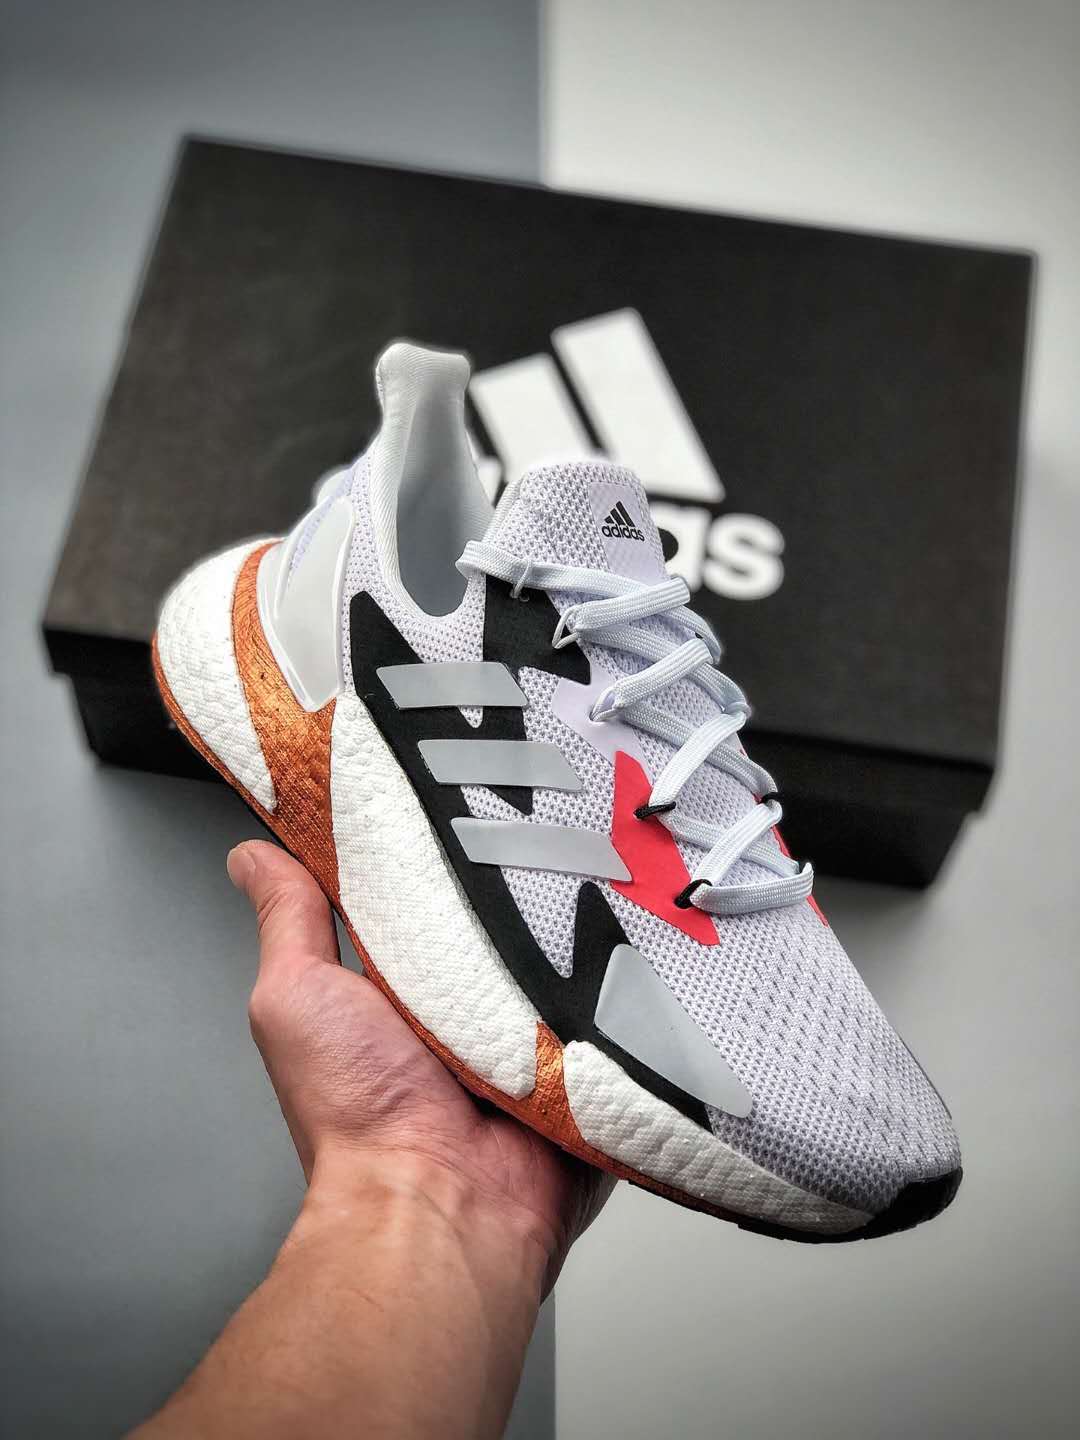 Adidas X9000L4 Boost White Solar Red Bronze FW8388 - Stylish and High-Performance Footwear